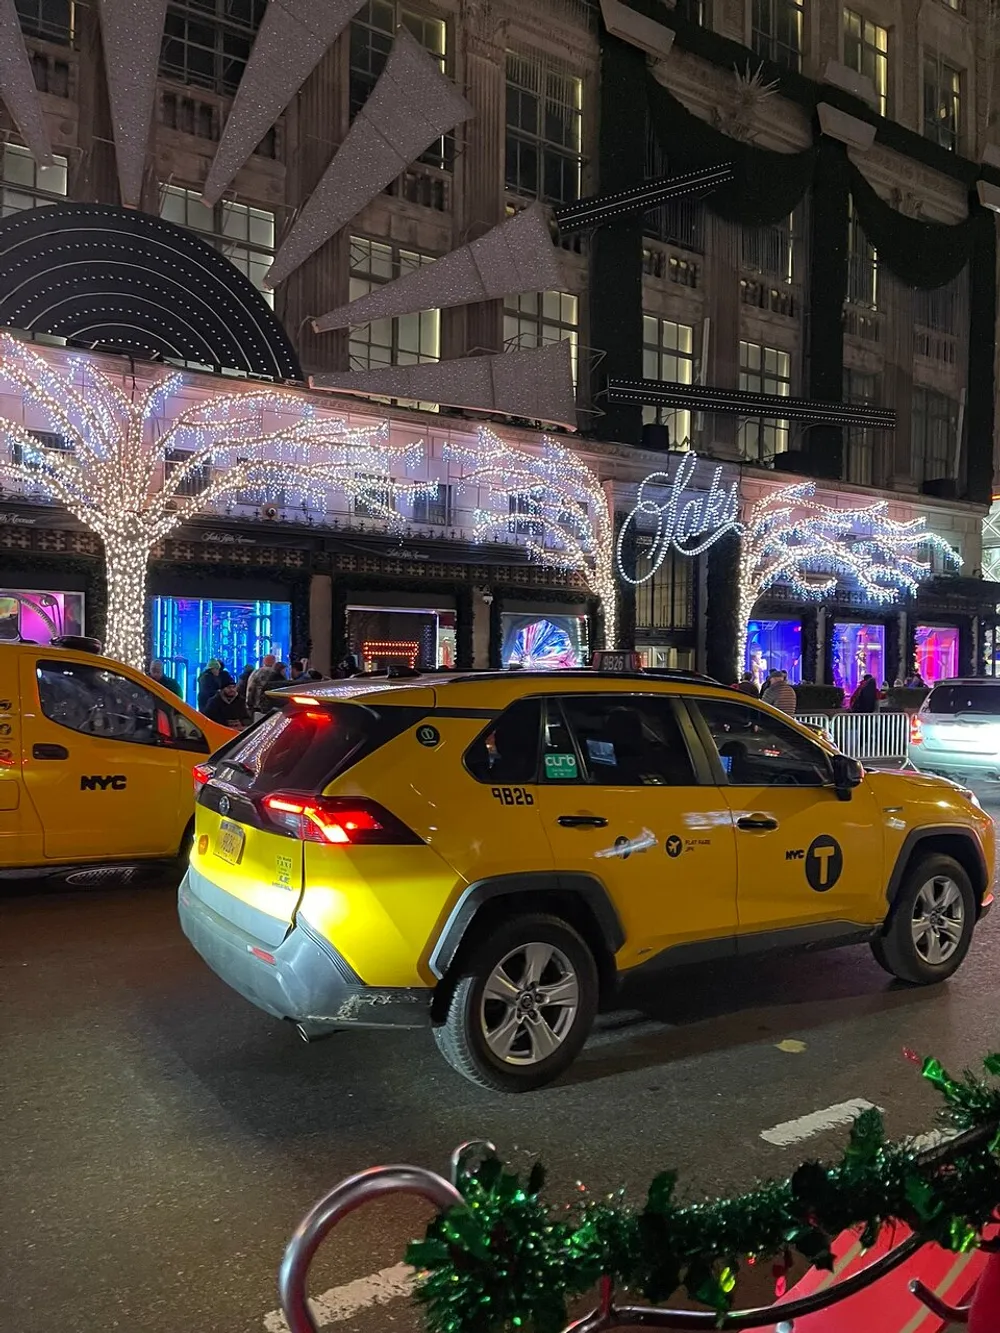 An iconic yellow NYC taxi is passing by a festively decorated building with large illuminated stars and glowing trees at night